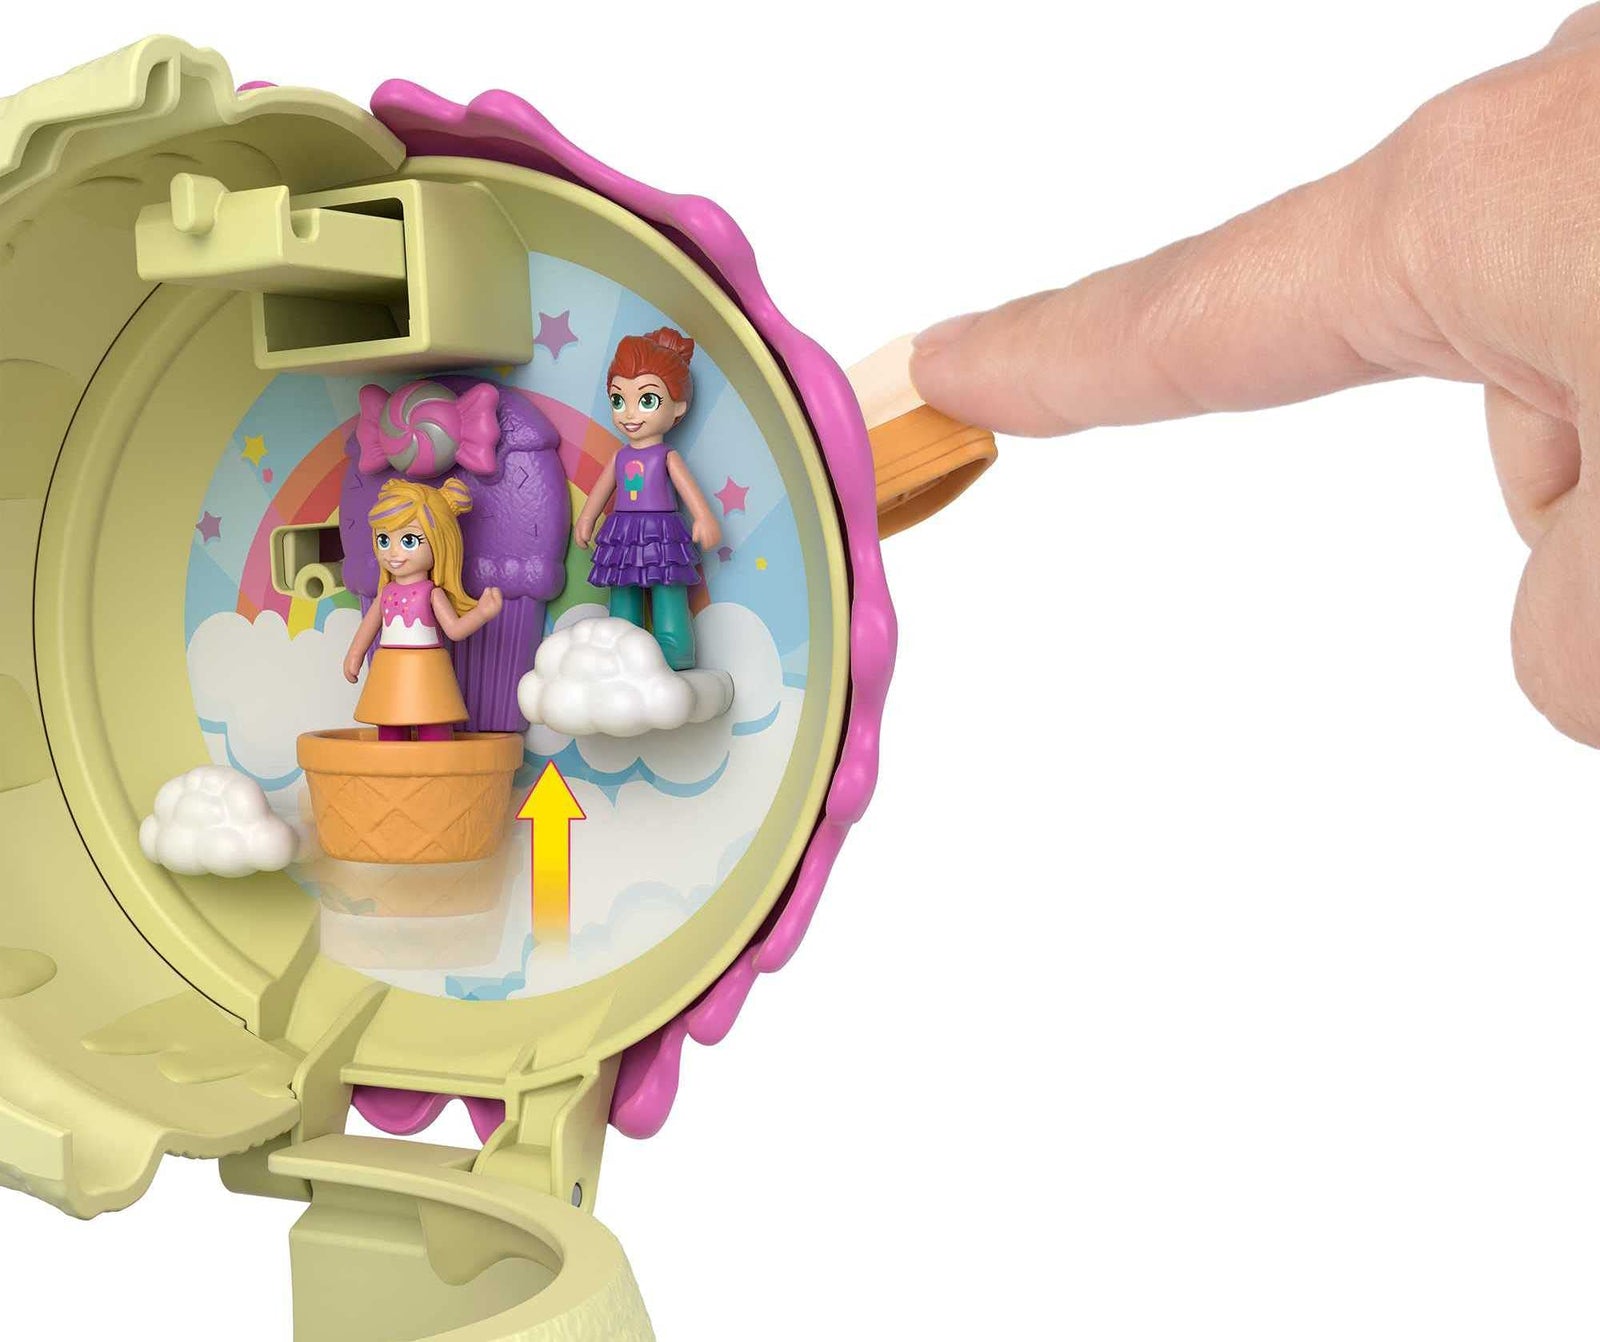 Polly Pocket Spin ‘n Surprise Compact Playset, Ice Cream Cone Shape, Playground Theme, 3 Floors, 25 Surprise Accessories Including Micro Polly & Lila Dolls, Great Gift for Ages 4 Years Old & Up